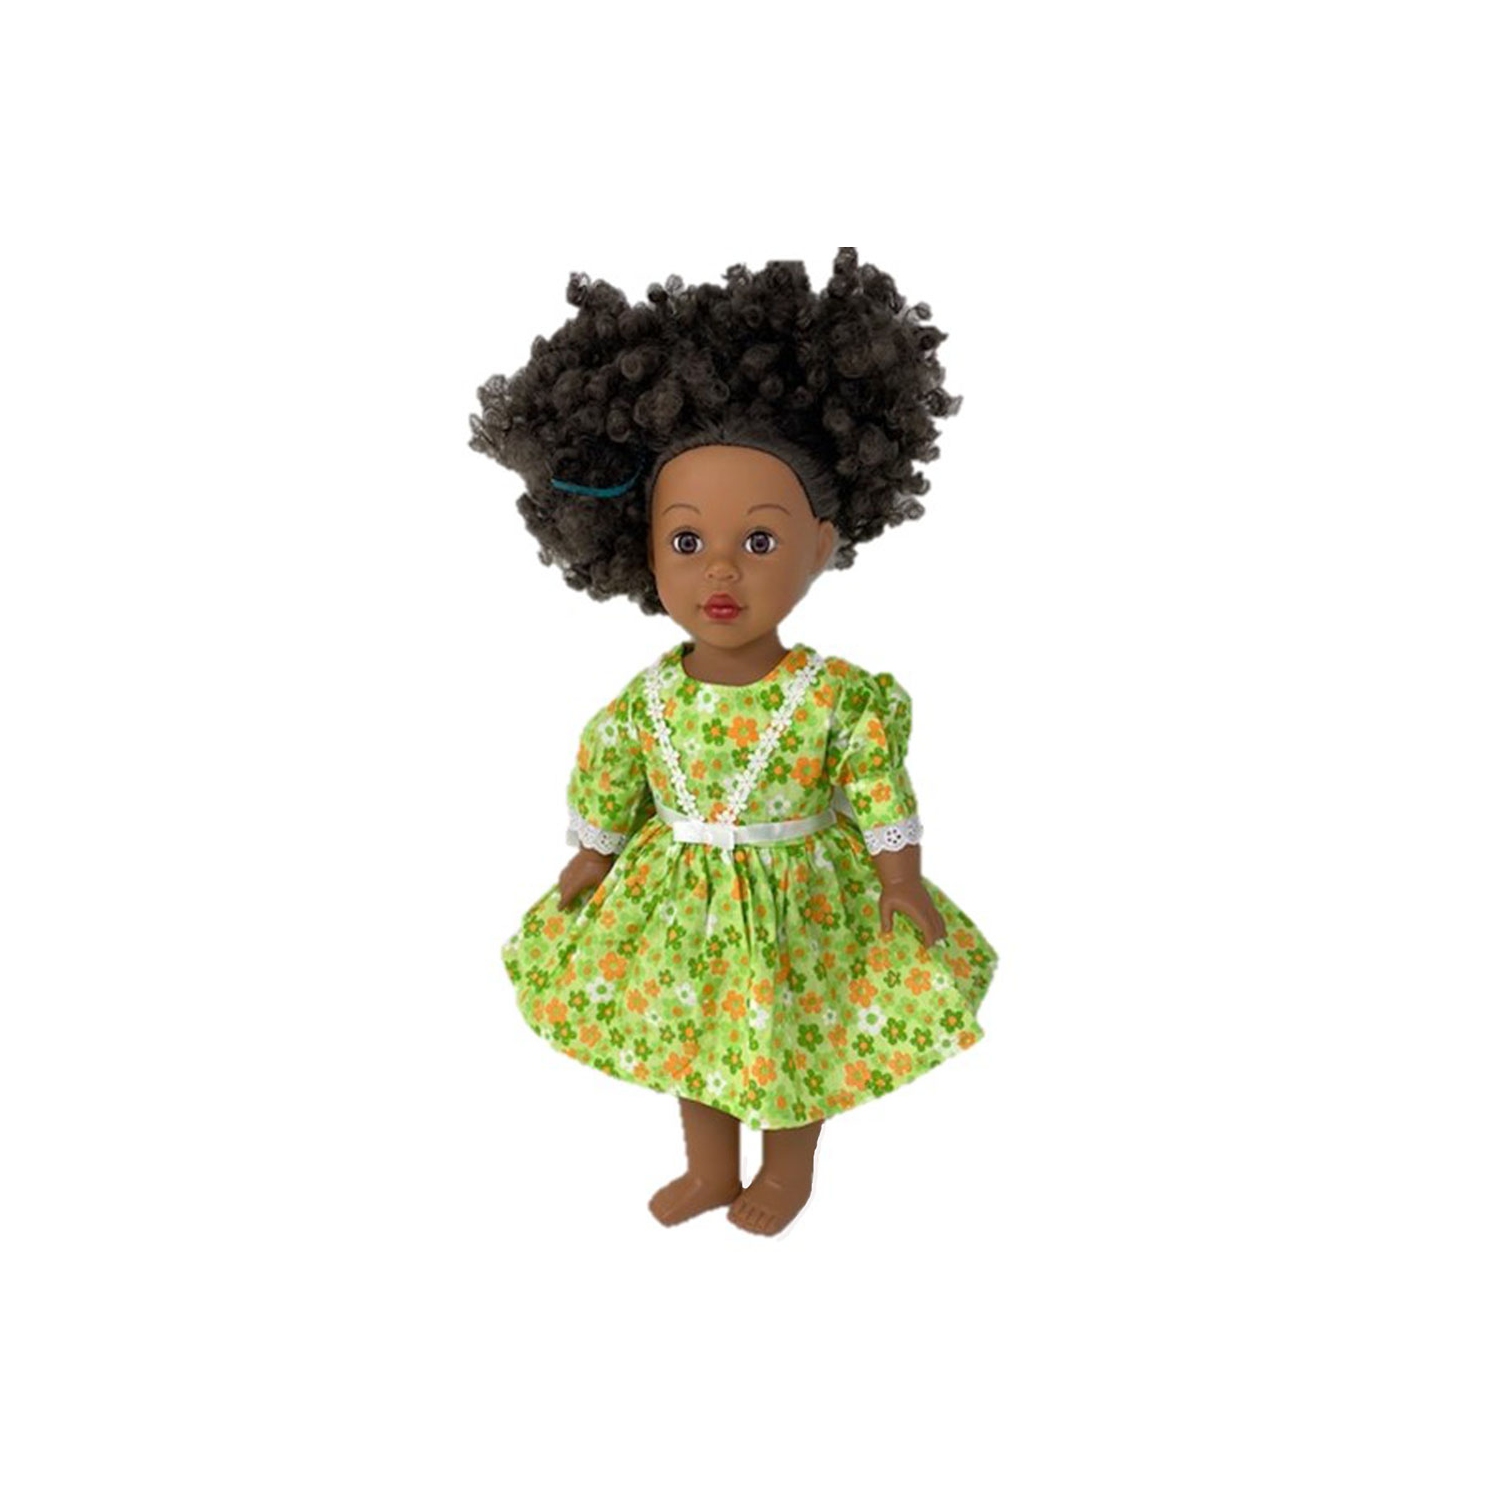 Doll Clothes Superstore Lace, Glitter and Flowers For 18 Inch Girl Like American Girl Our Generation My Life And 15 Inch Baby Dolls